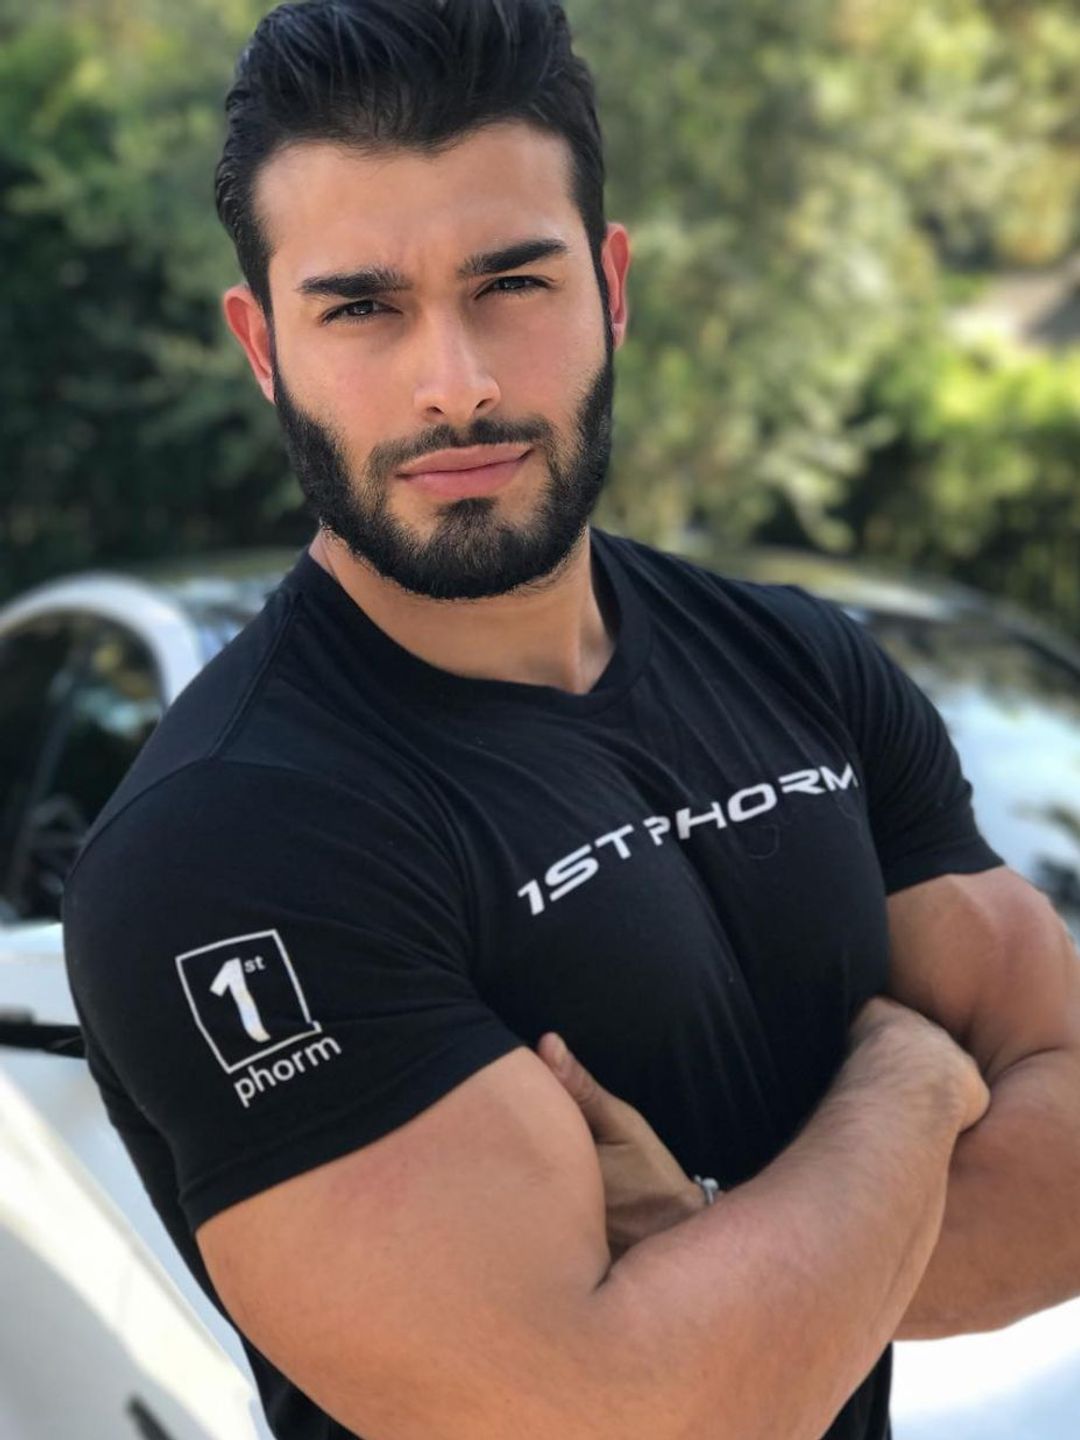 Sam Asghari who is his father